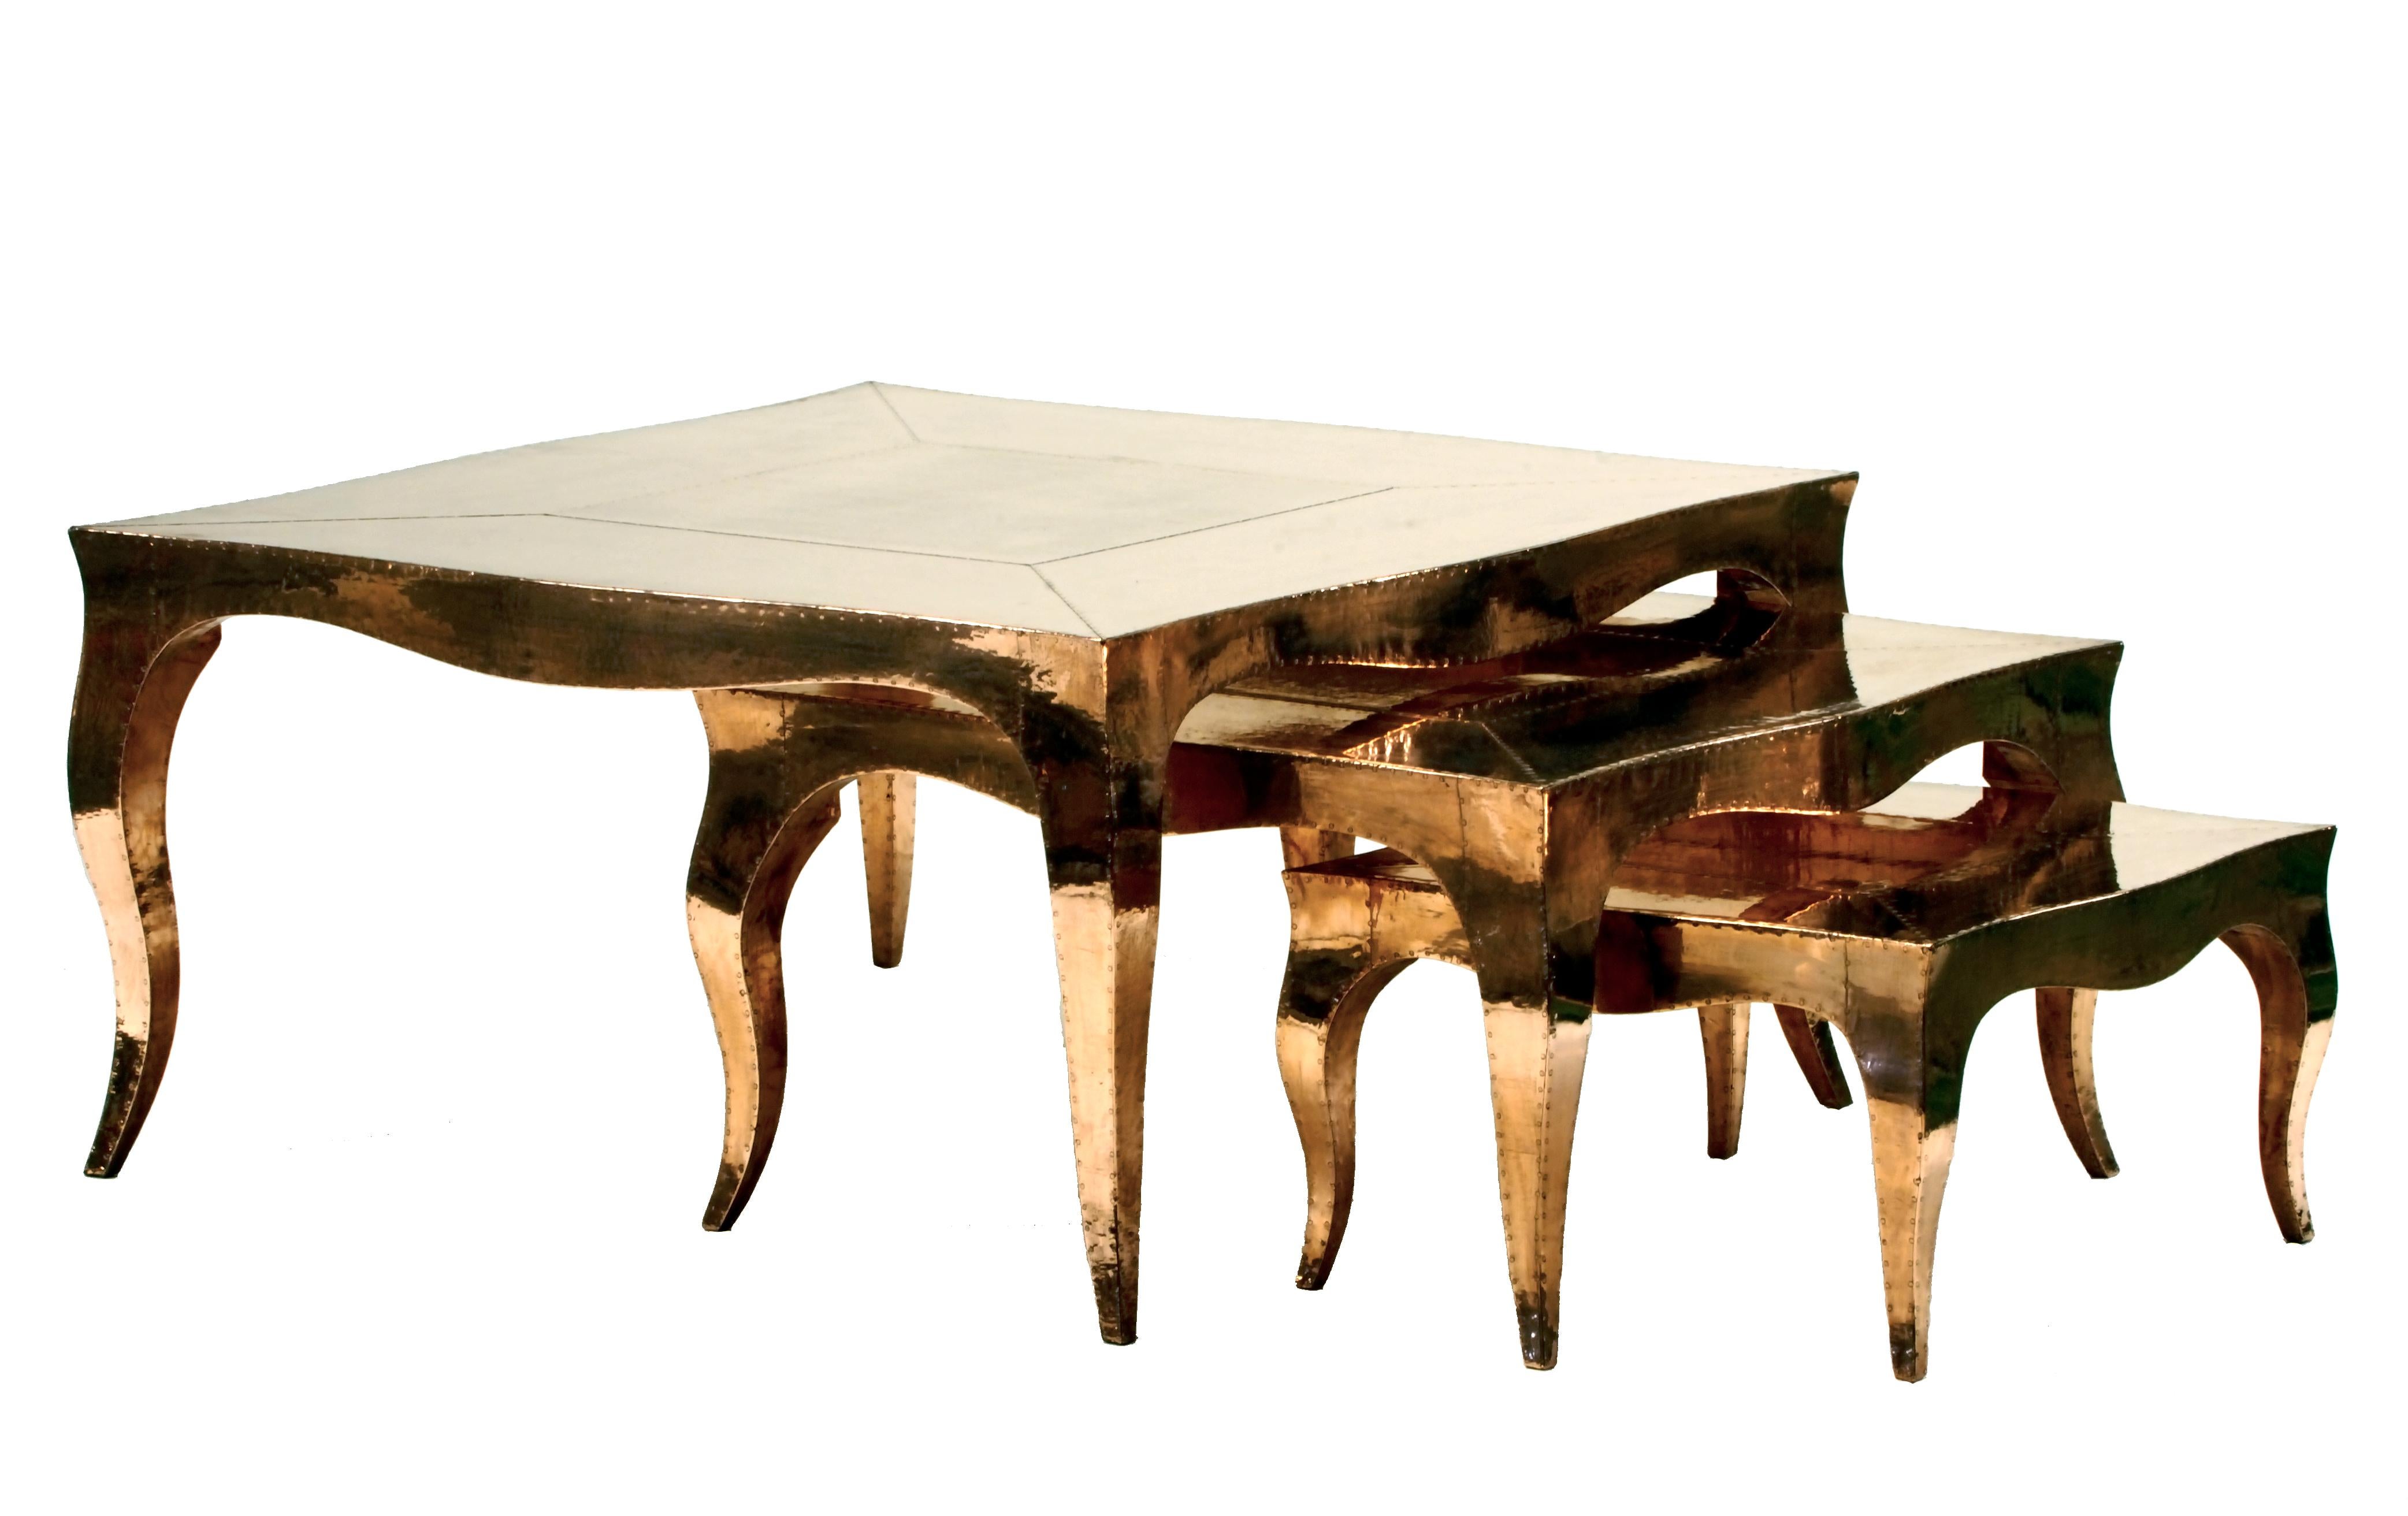 Louise Art Deco Industrial and Work Tables Mid. Hammered Copper by Paul Mathieu For Sale 9